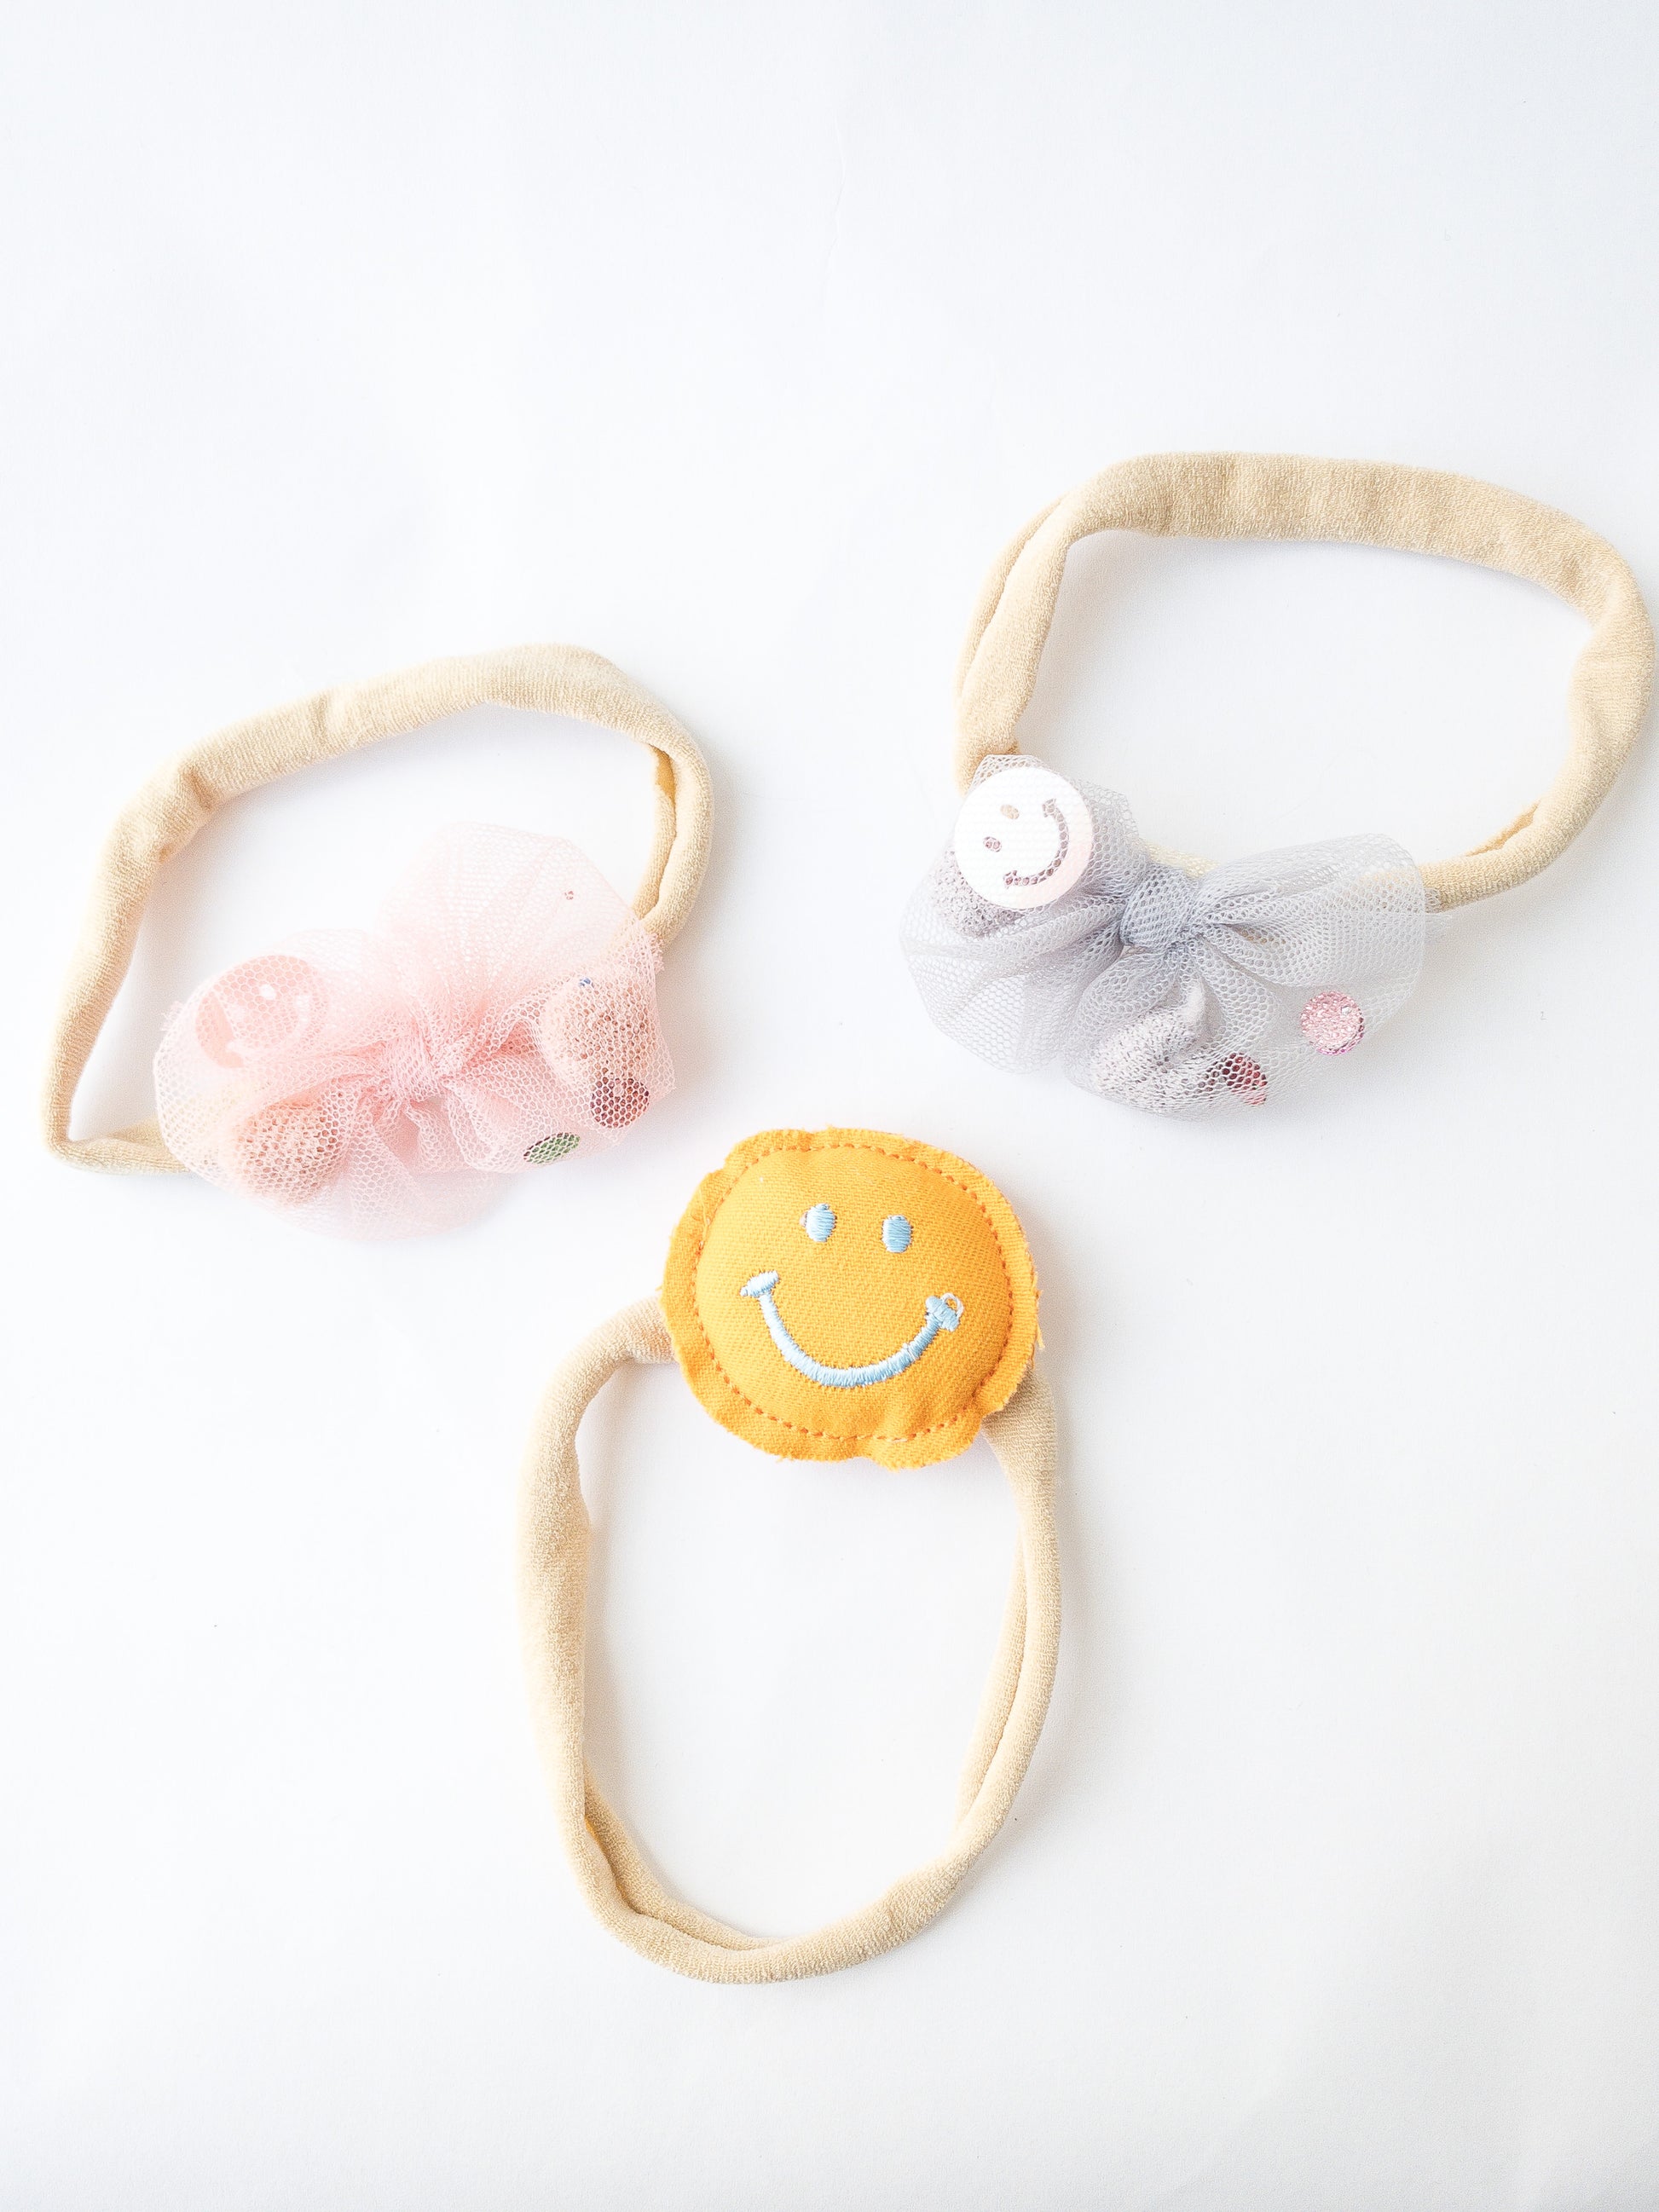 A 3-piece set. This set comes with a friendly plush smiley face headband, a pink mesh bow headband and a grey mesh bow headband with pom poms, sequins and smiley faces inside. Great for kids with little to no hair. The nylon elastic is super stretchy and super soft.